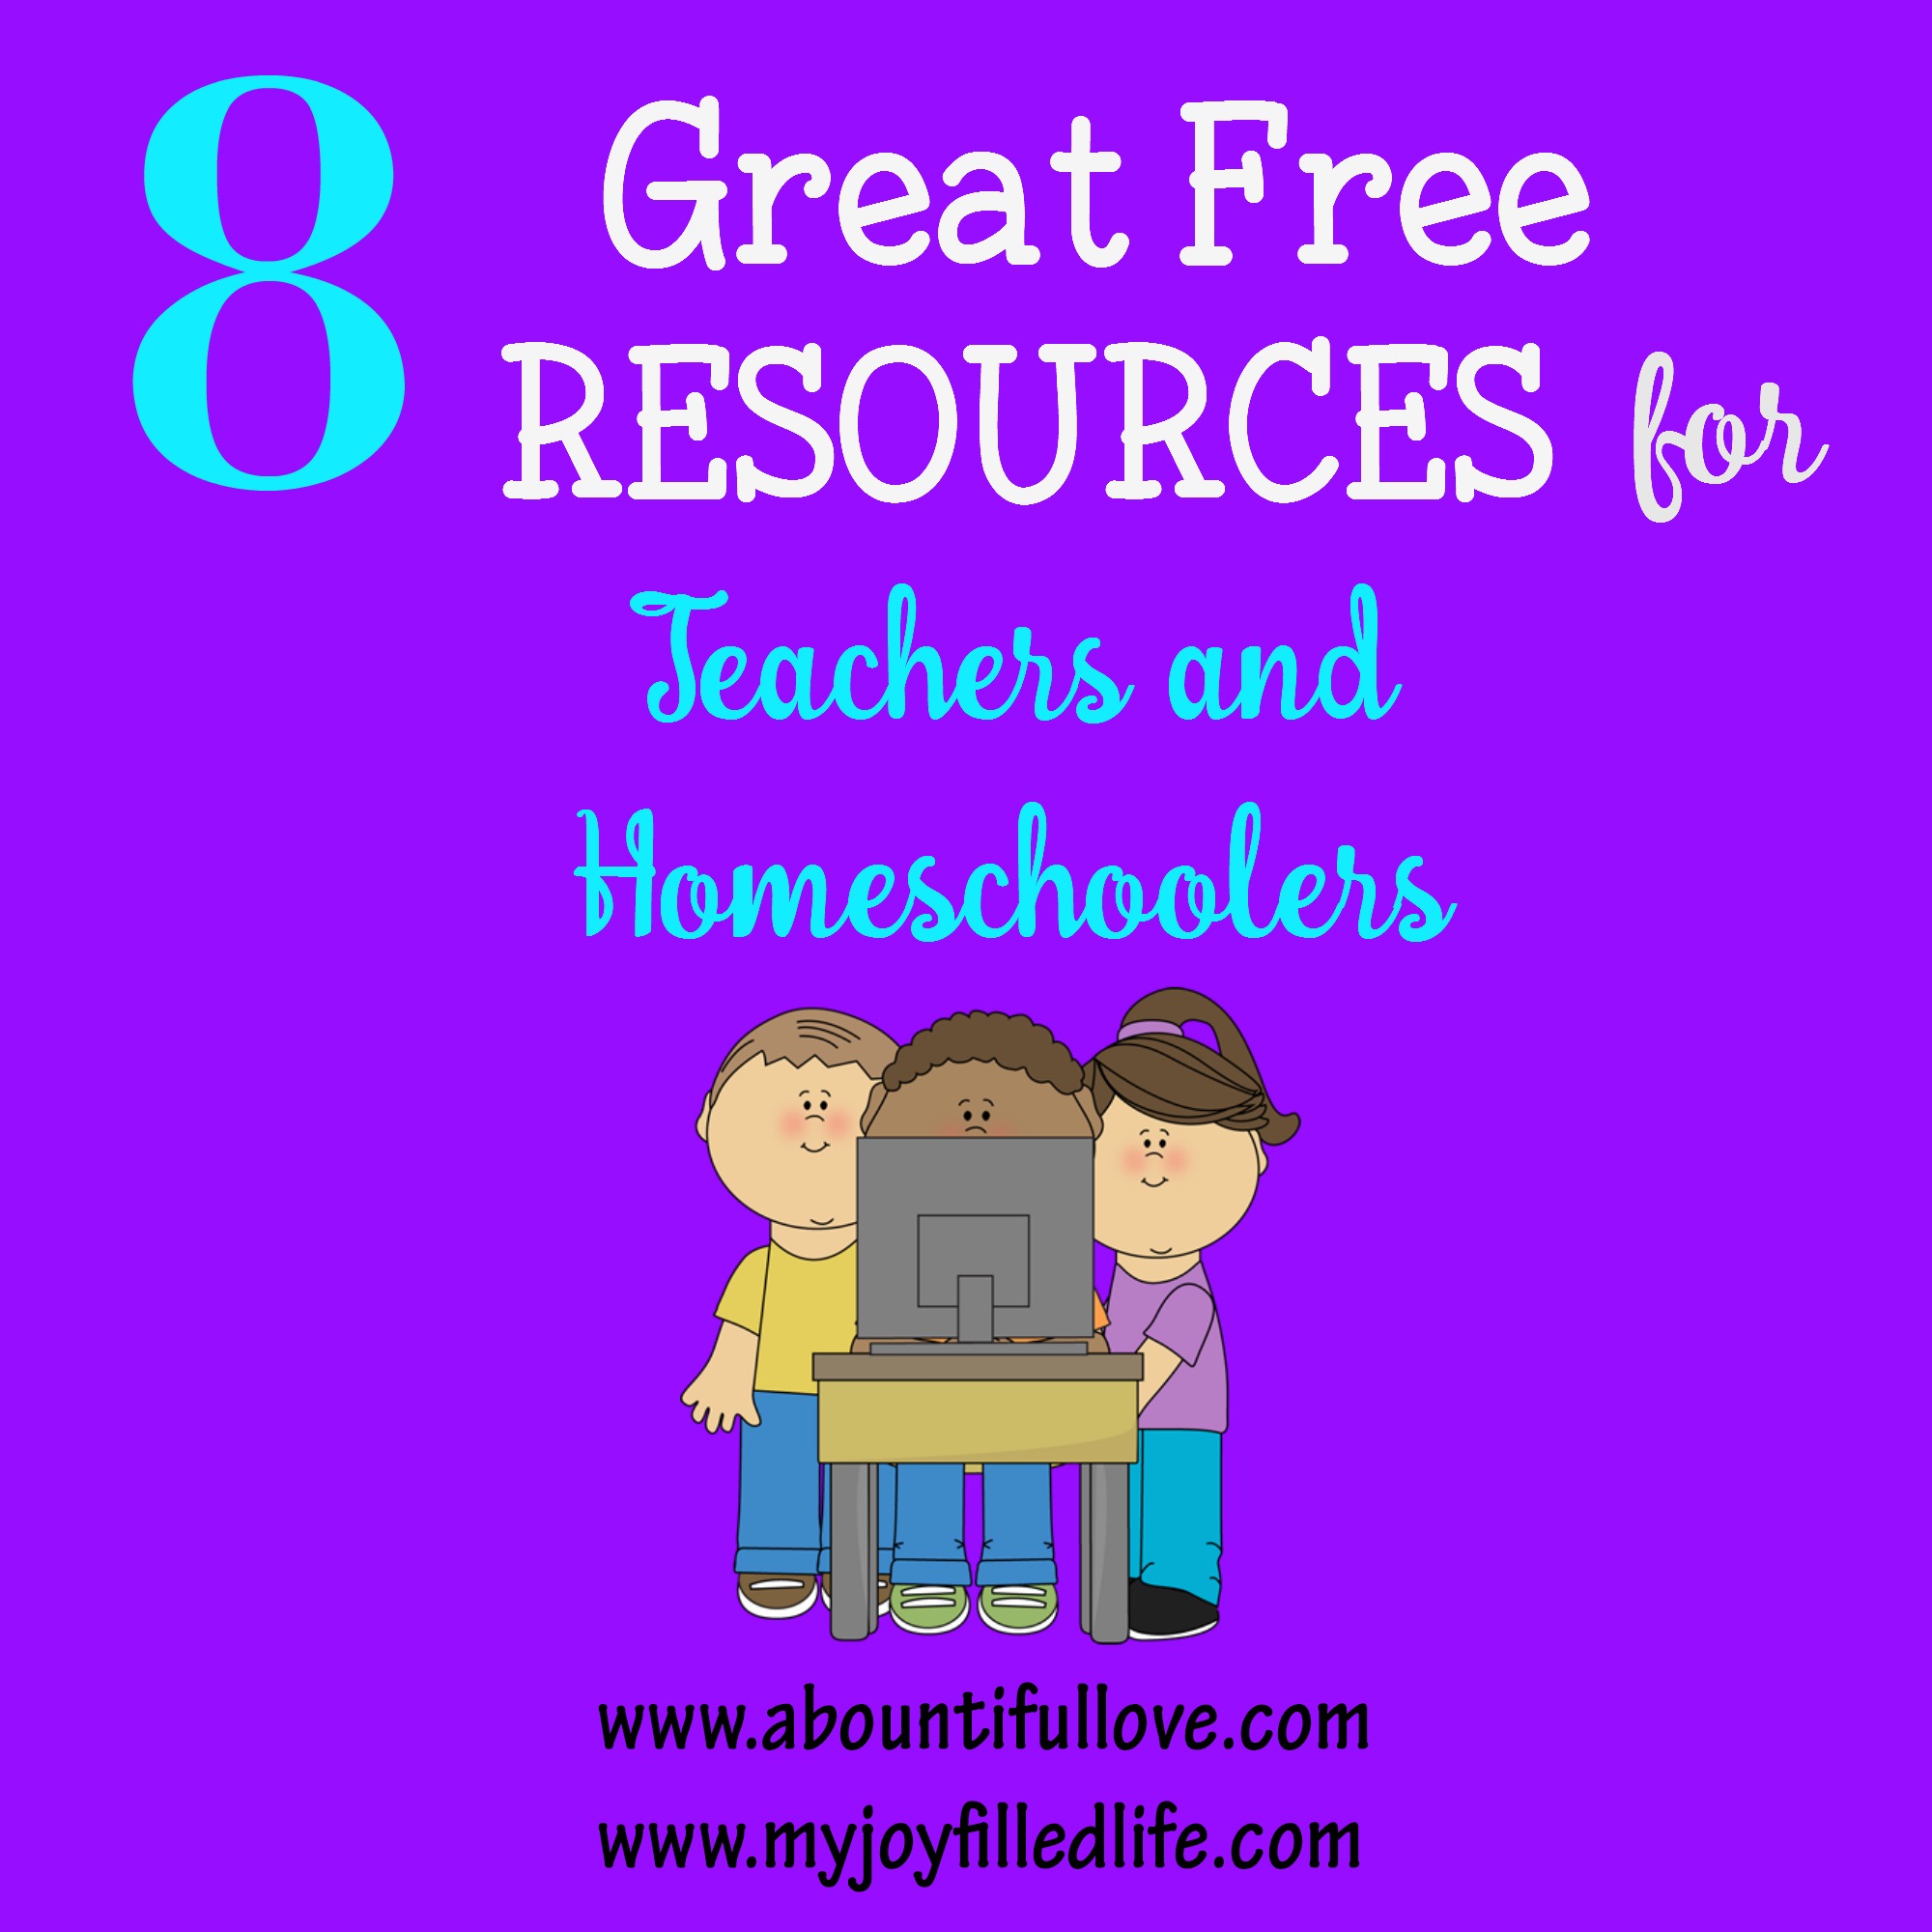 8 Great Free Resources for Teachers and Homeschoolers